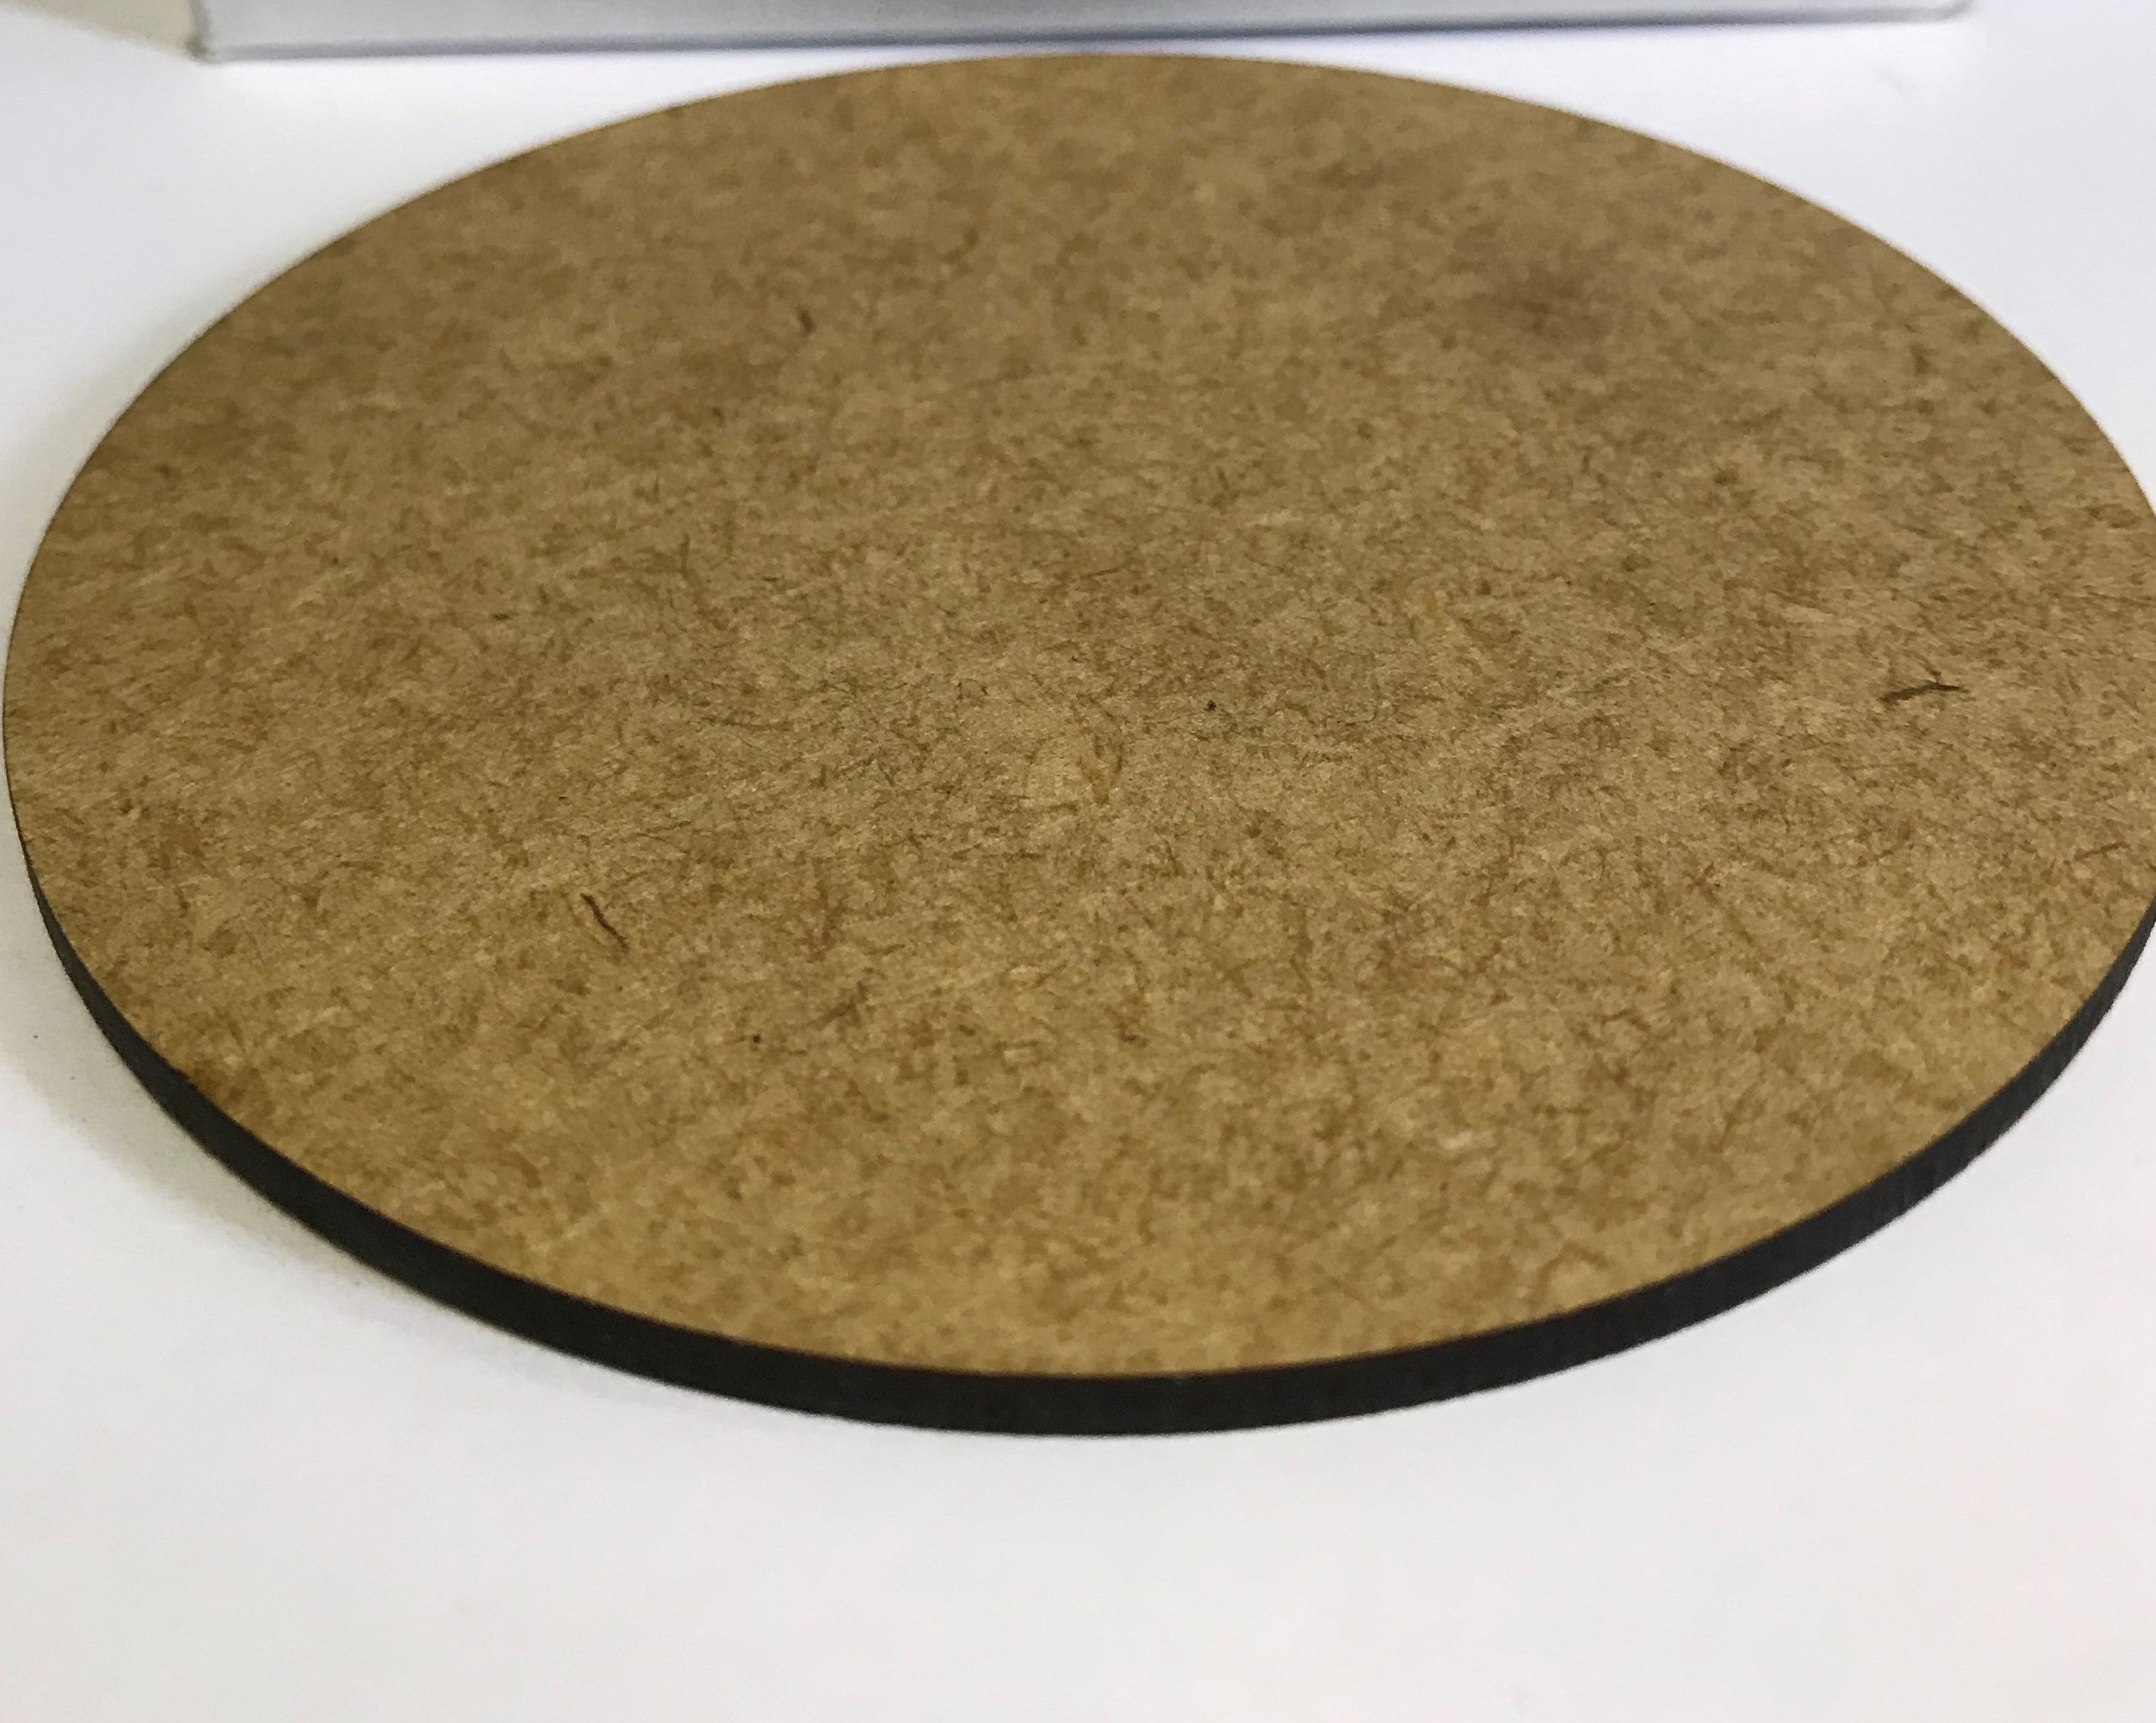 3 mm - Laser Cut Coasters - Round - 6 in a pack